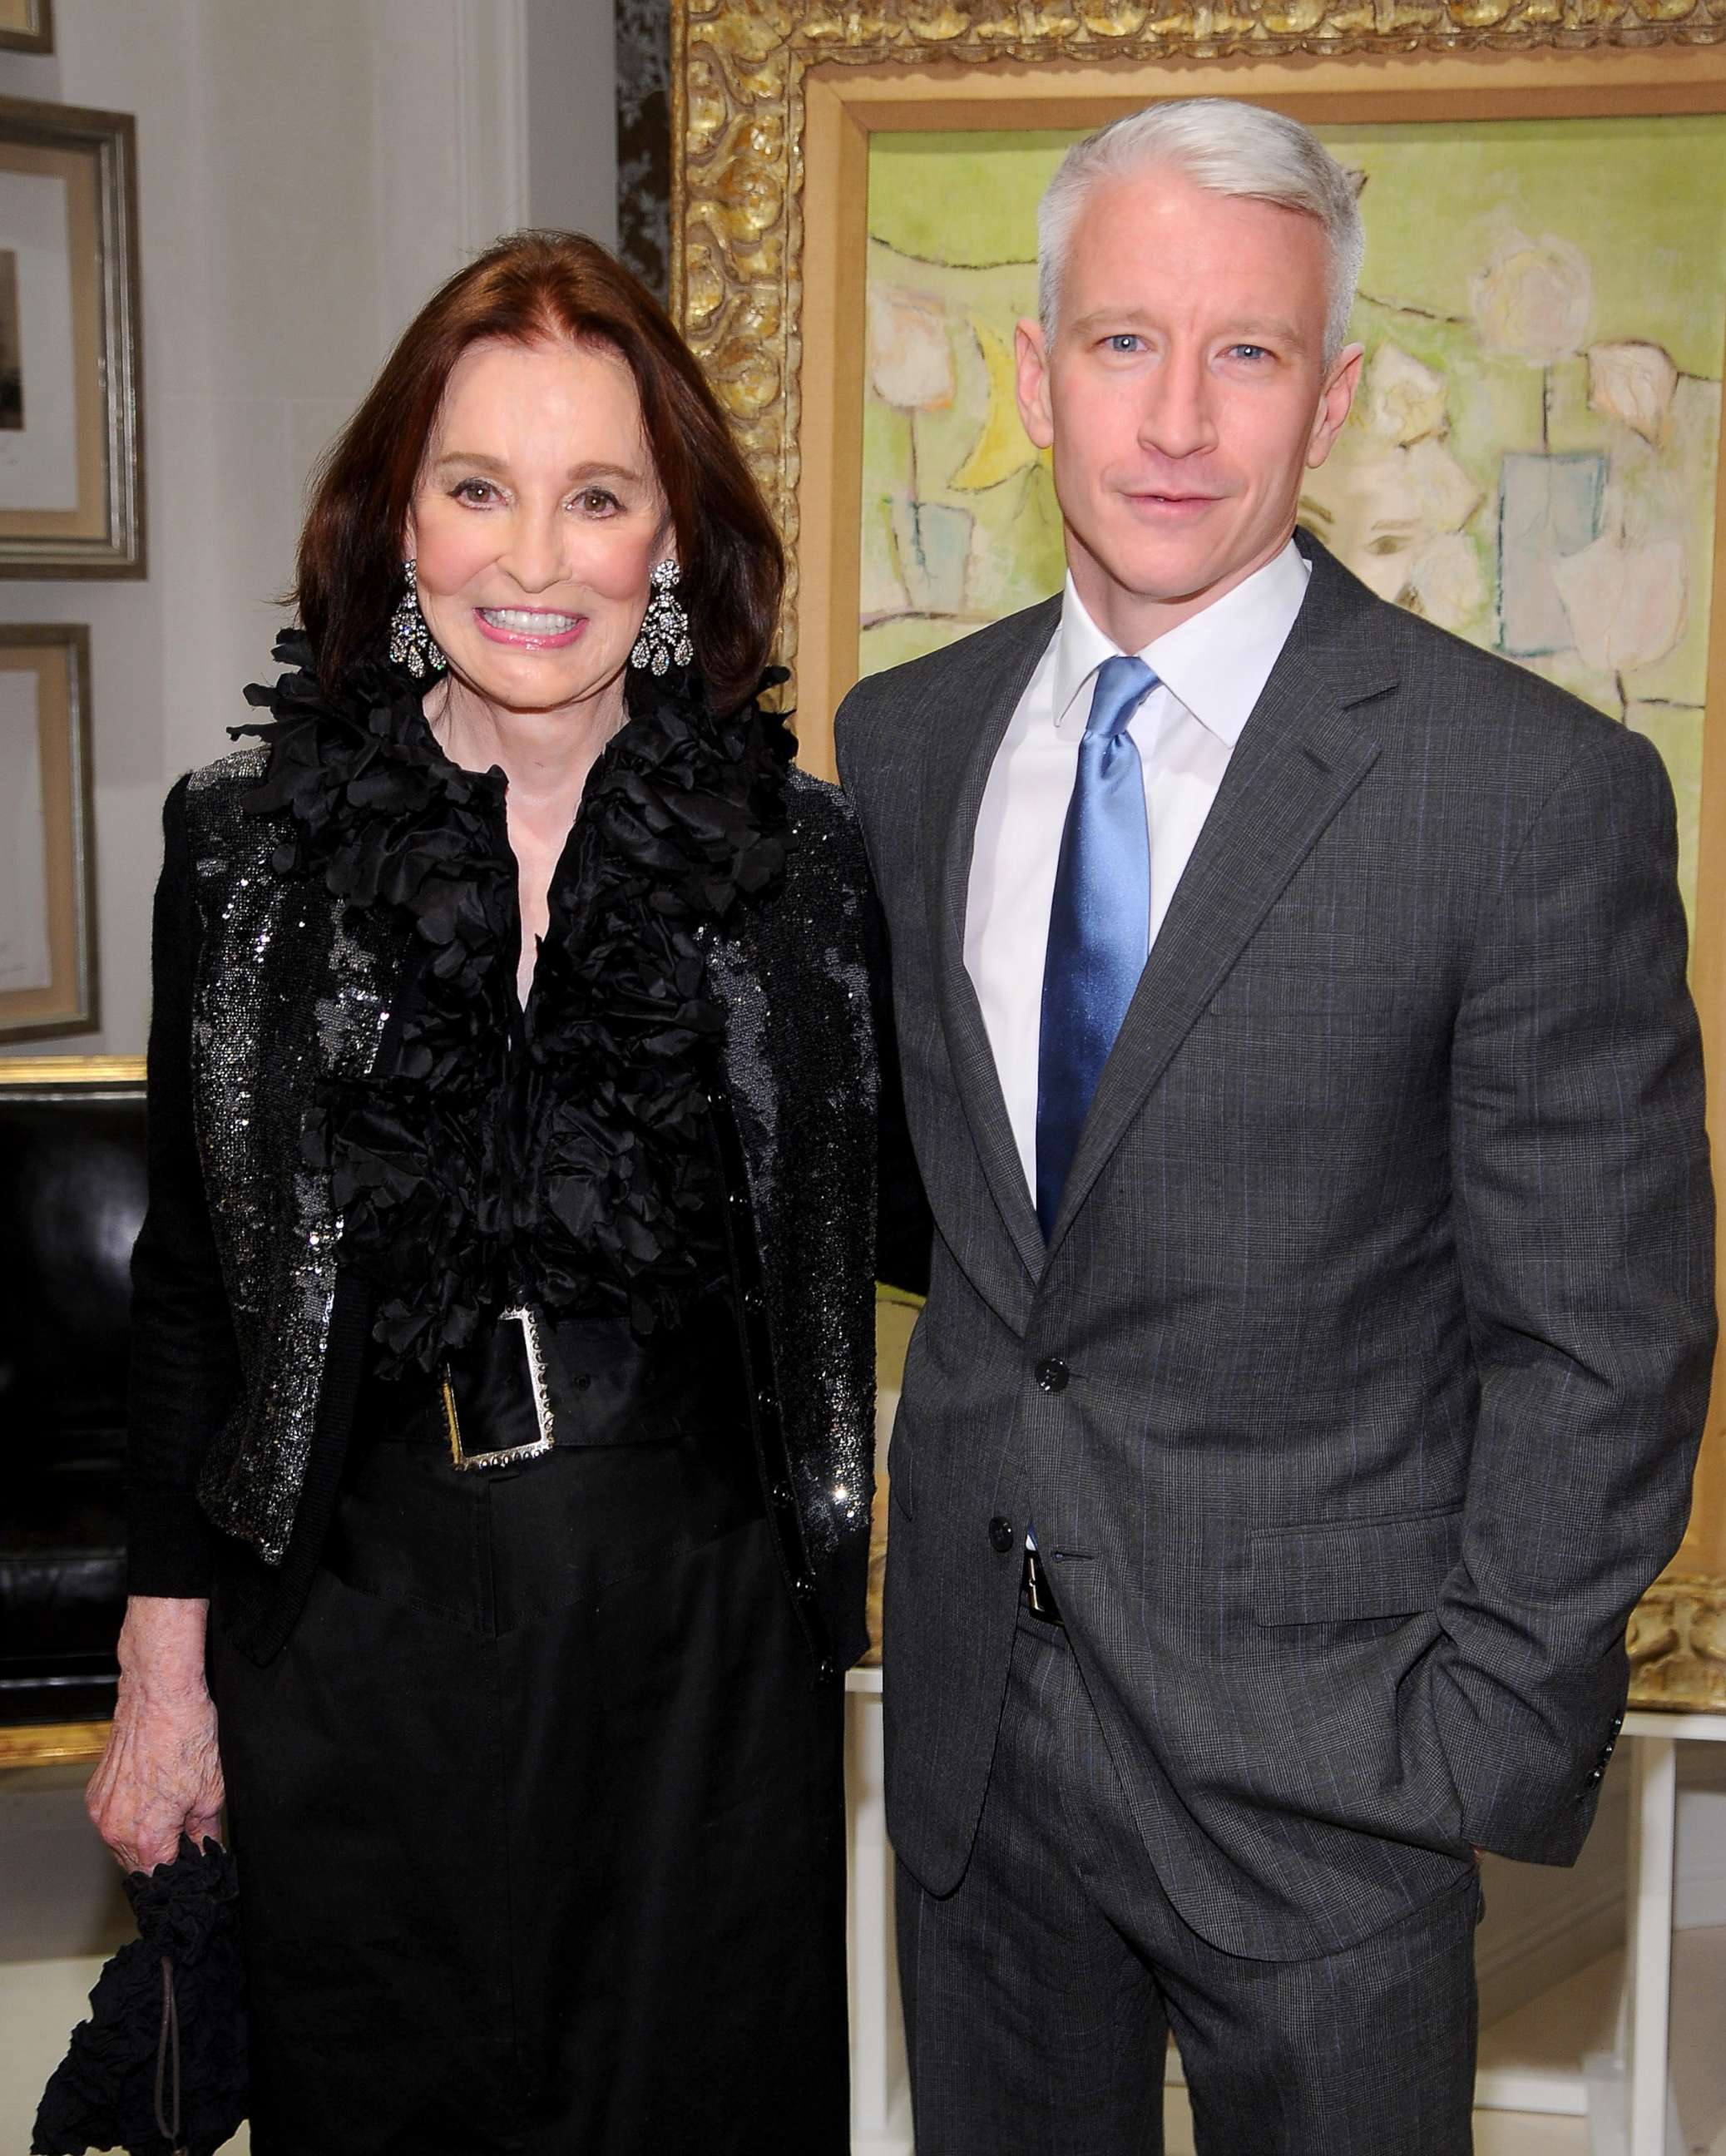 Gloria Vanderbilt dies at 95 surrounded by loved ones, son Anderson Cooper  says - ABC News